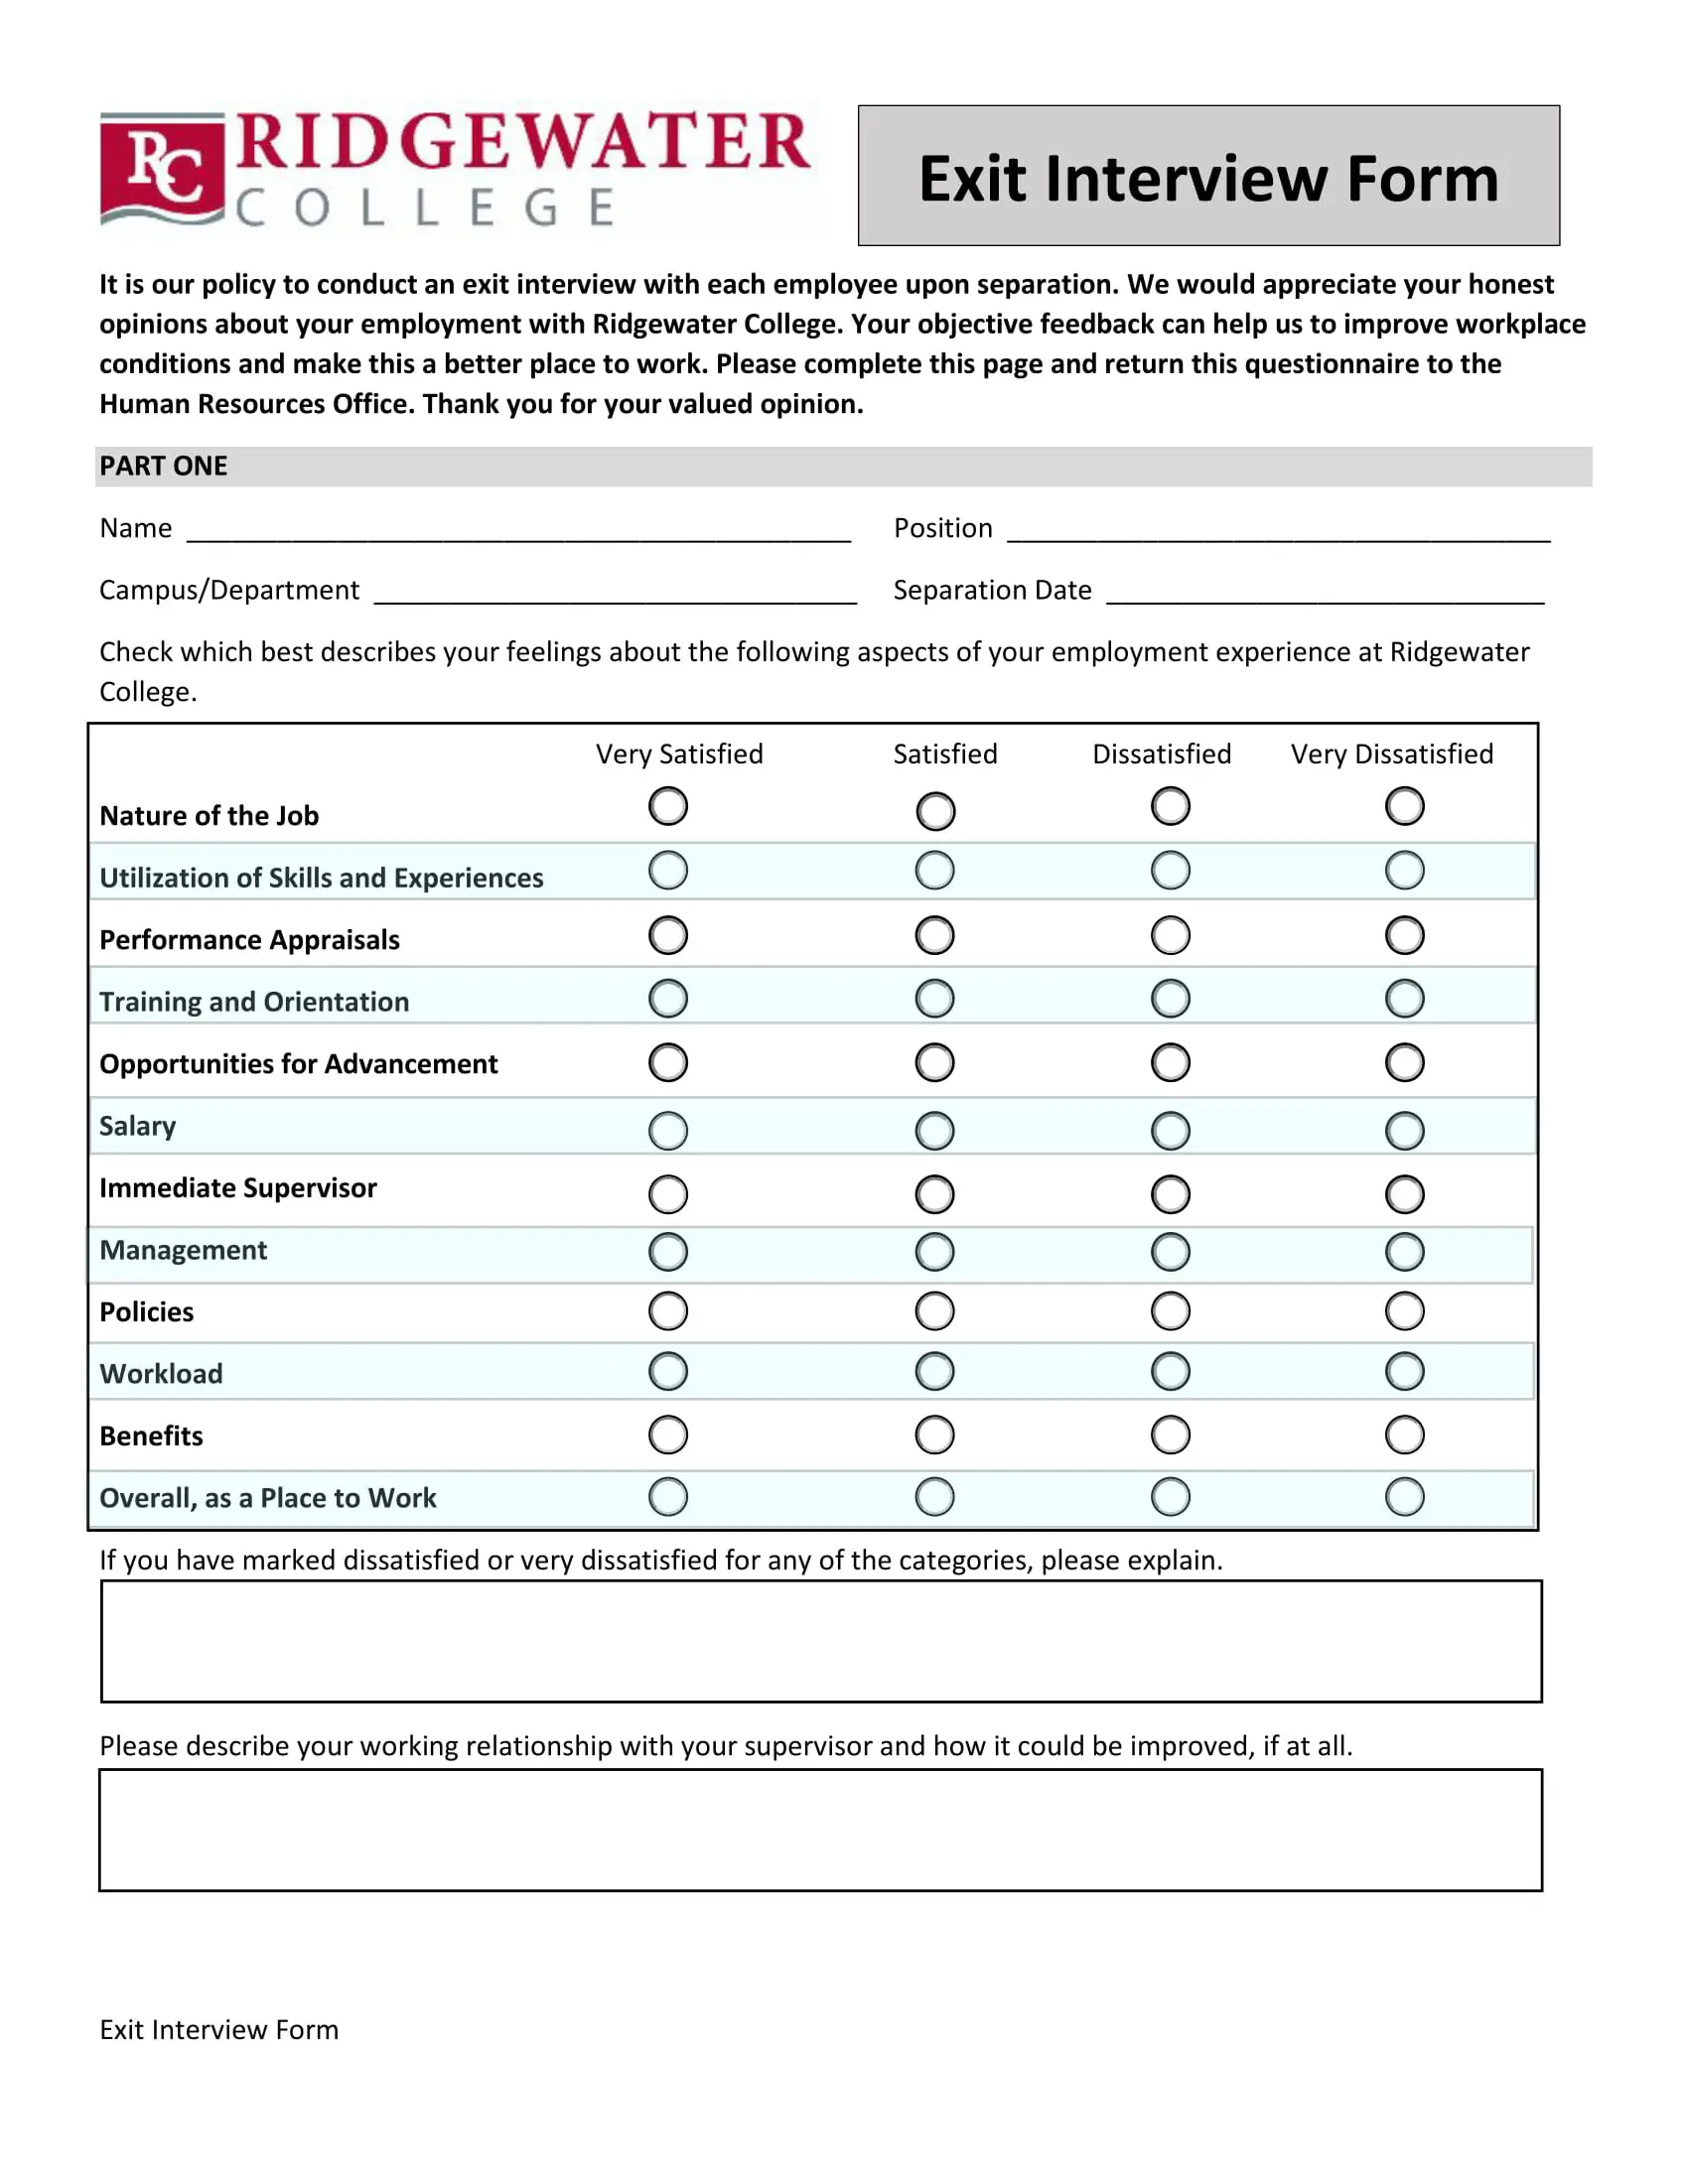 FREE 5+ Exit Interview Forms in PDF